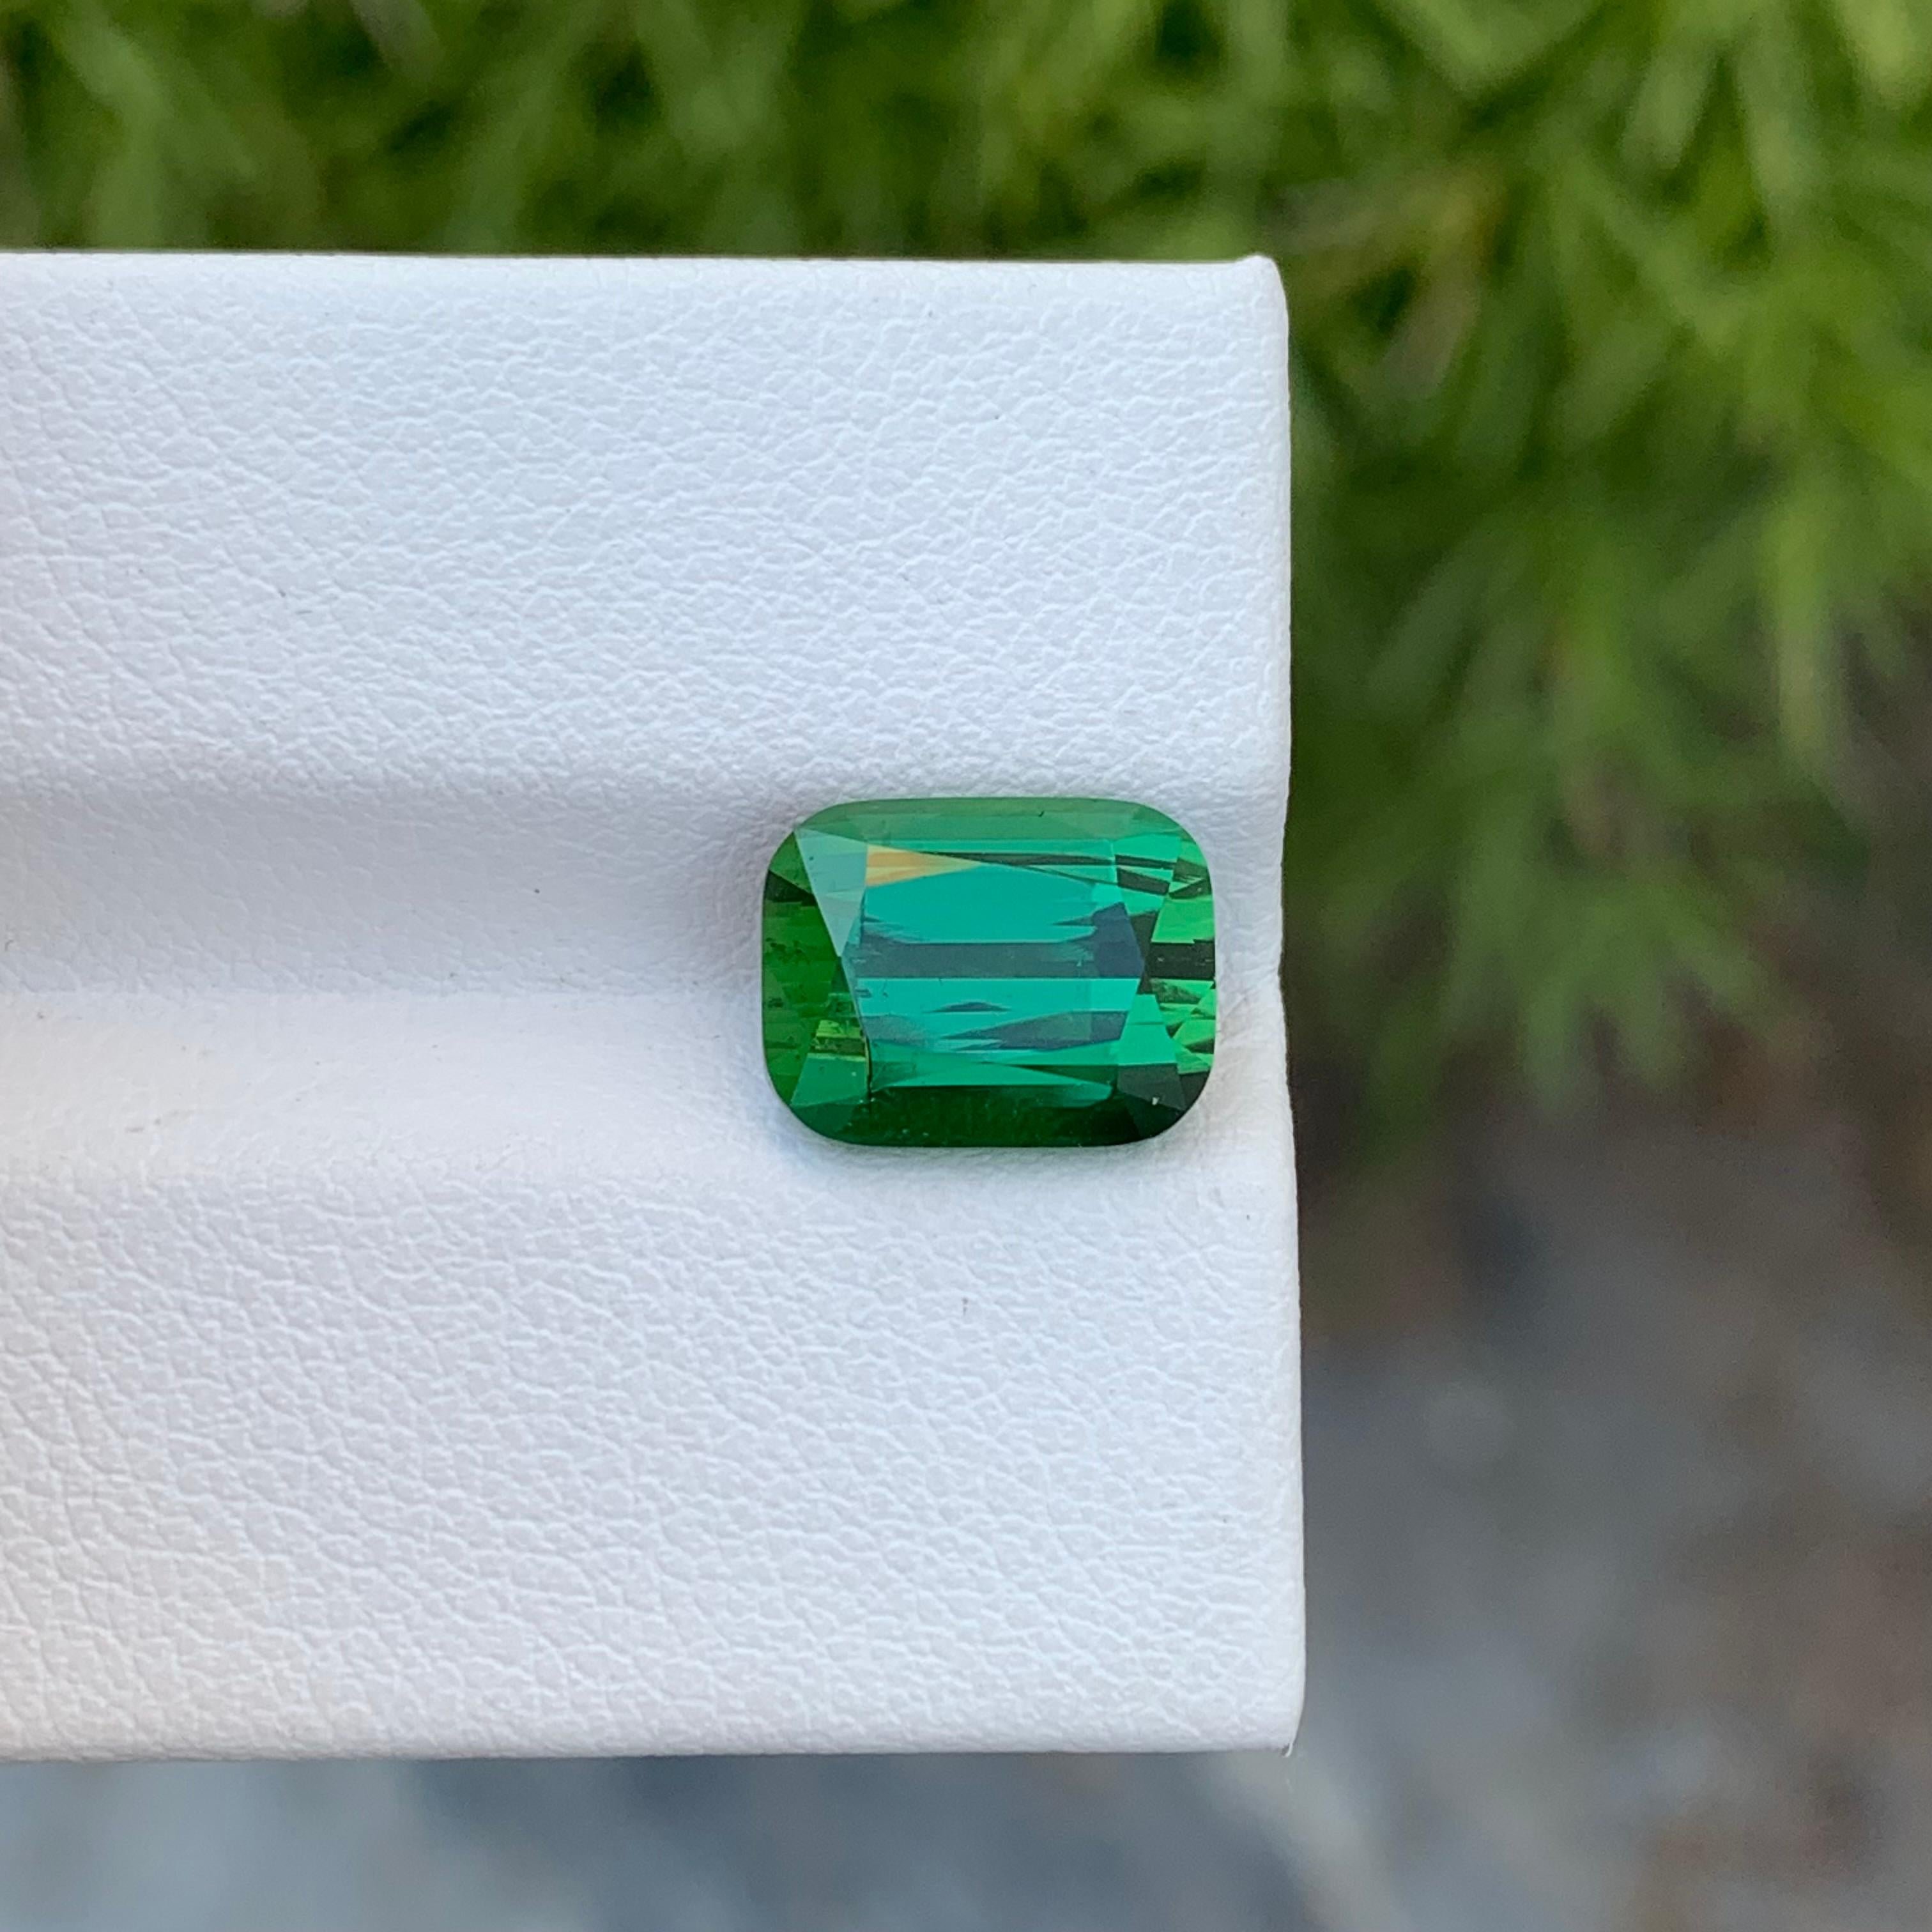 Loose Green Lagoon Tourmaline

Weight: 4.60 Carats
Dimension: 10.2 x 8 x 6.4 Mm
Colour: Green Lagoon
Origin: Afghanistan
Certificate: On Demand
Treatment: Non

Tourmaline is a captivating gemstone known for its remarkable variety of colors, making